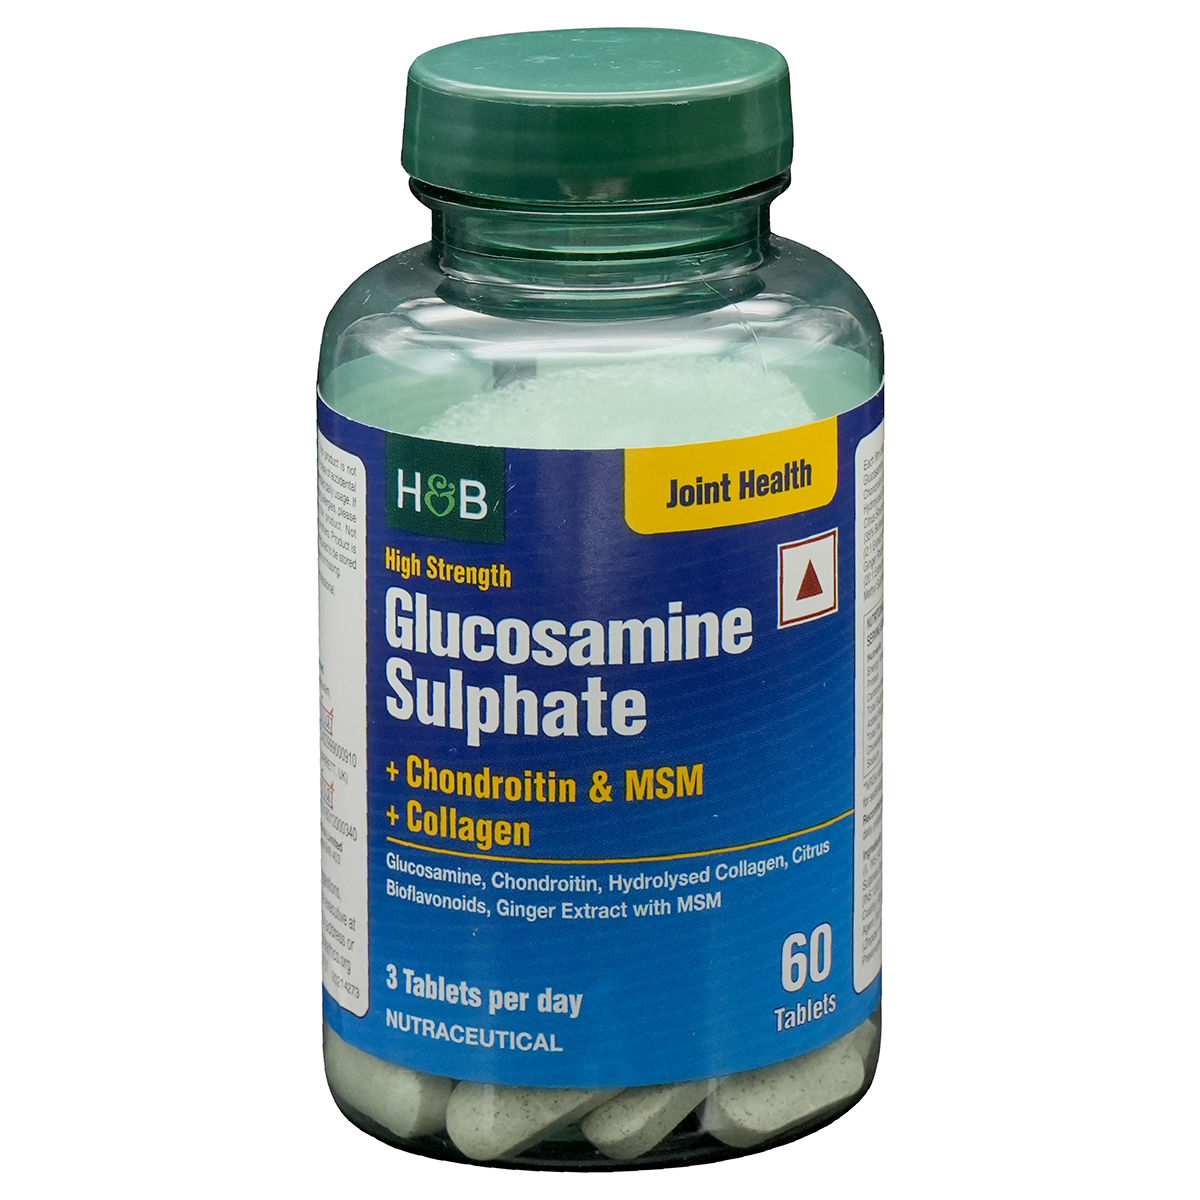 Buy Holland & Barrett High Strength Glucosamine Sulphate for Joint Health, 60 Tablets Online